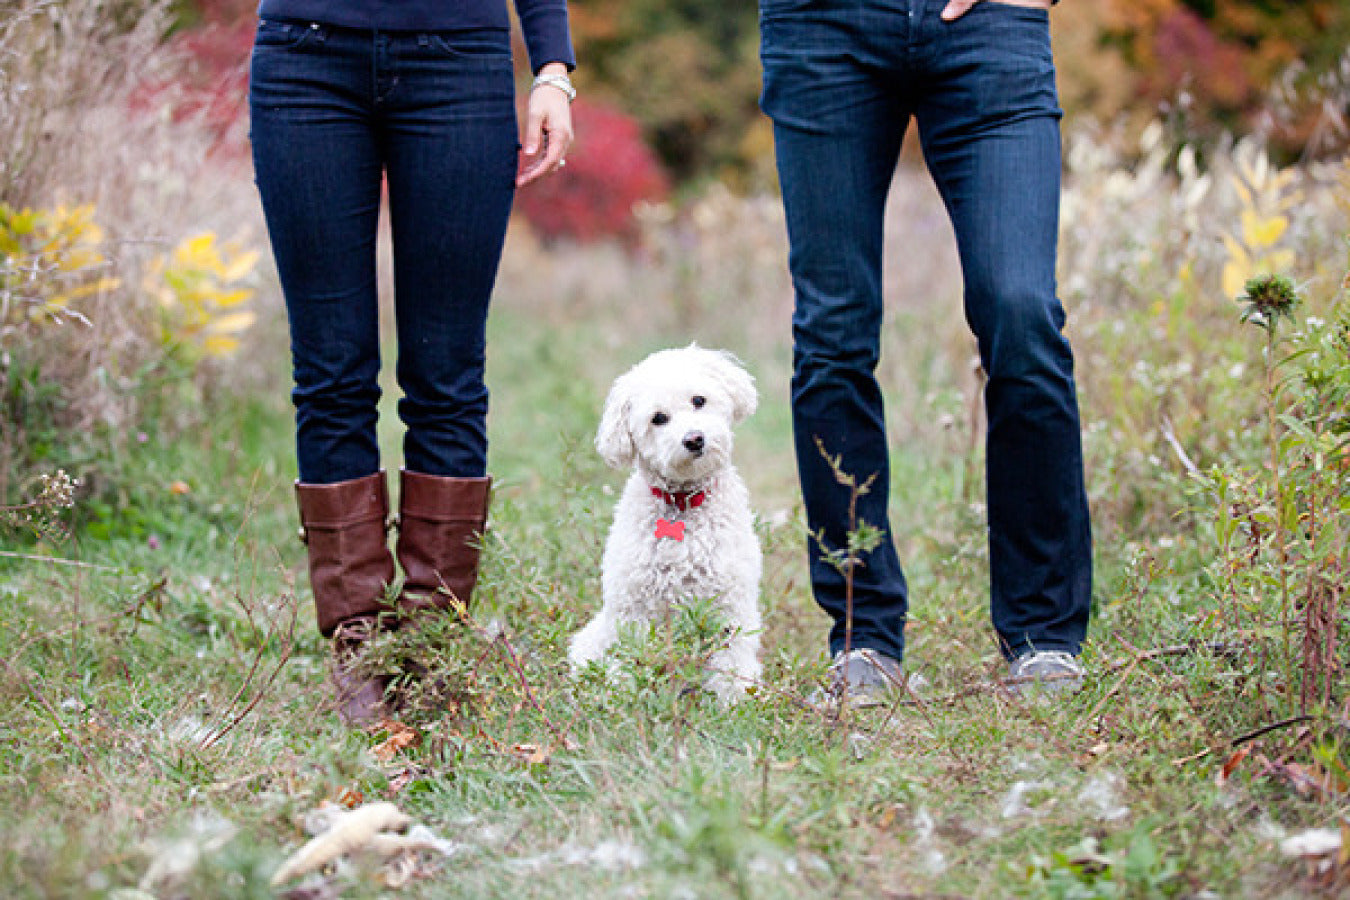 Inspiring Engagement Photos With Your Dog